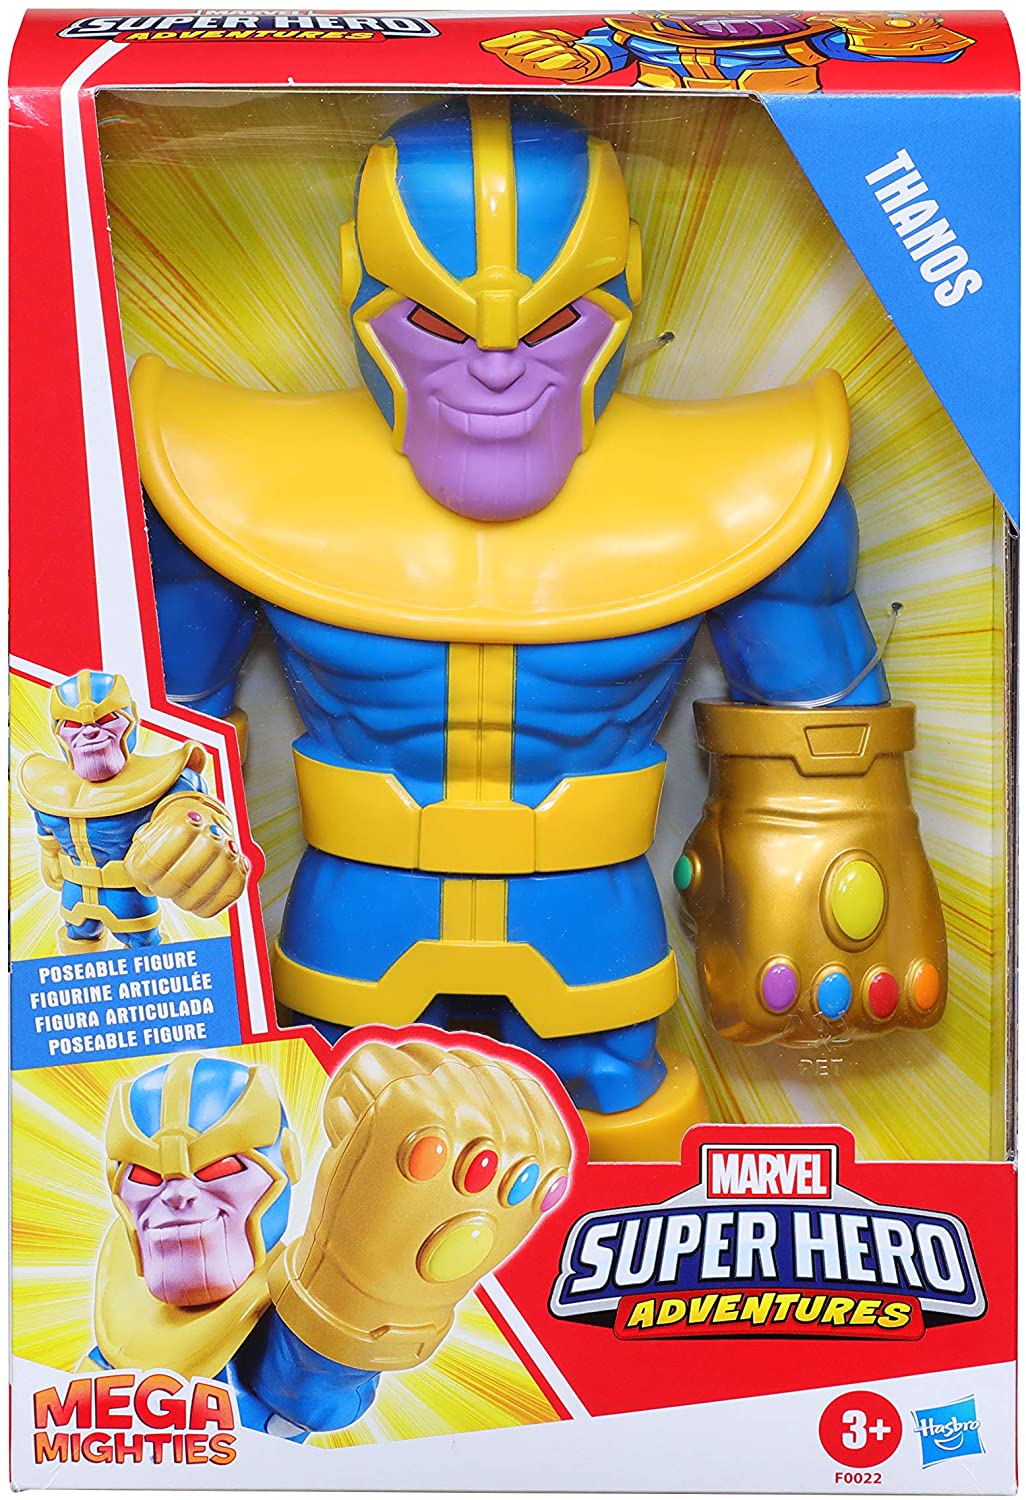 Playskool Heroes Mega Mighties Marvel Super Hero Adventures Thanos, Collectible 25-cm Action Figure, Toys for Children Aged 3 and Up